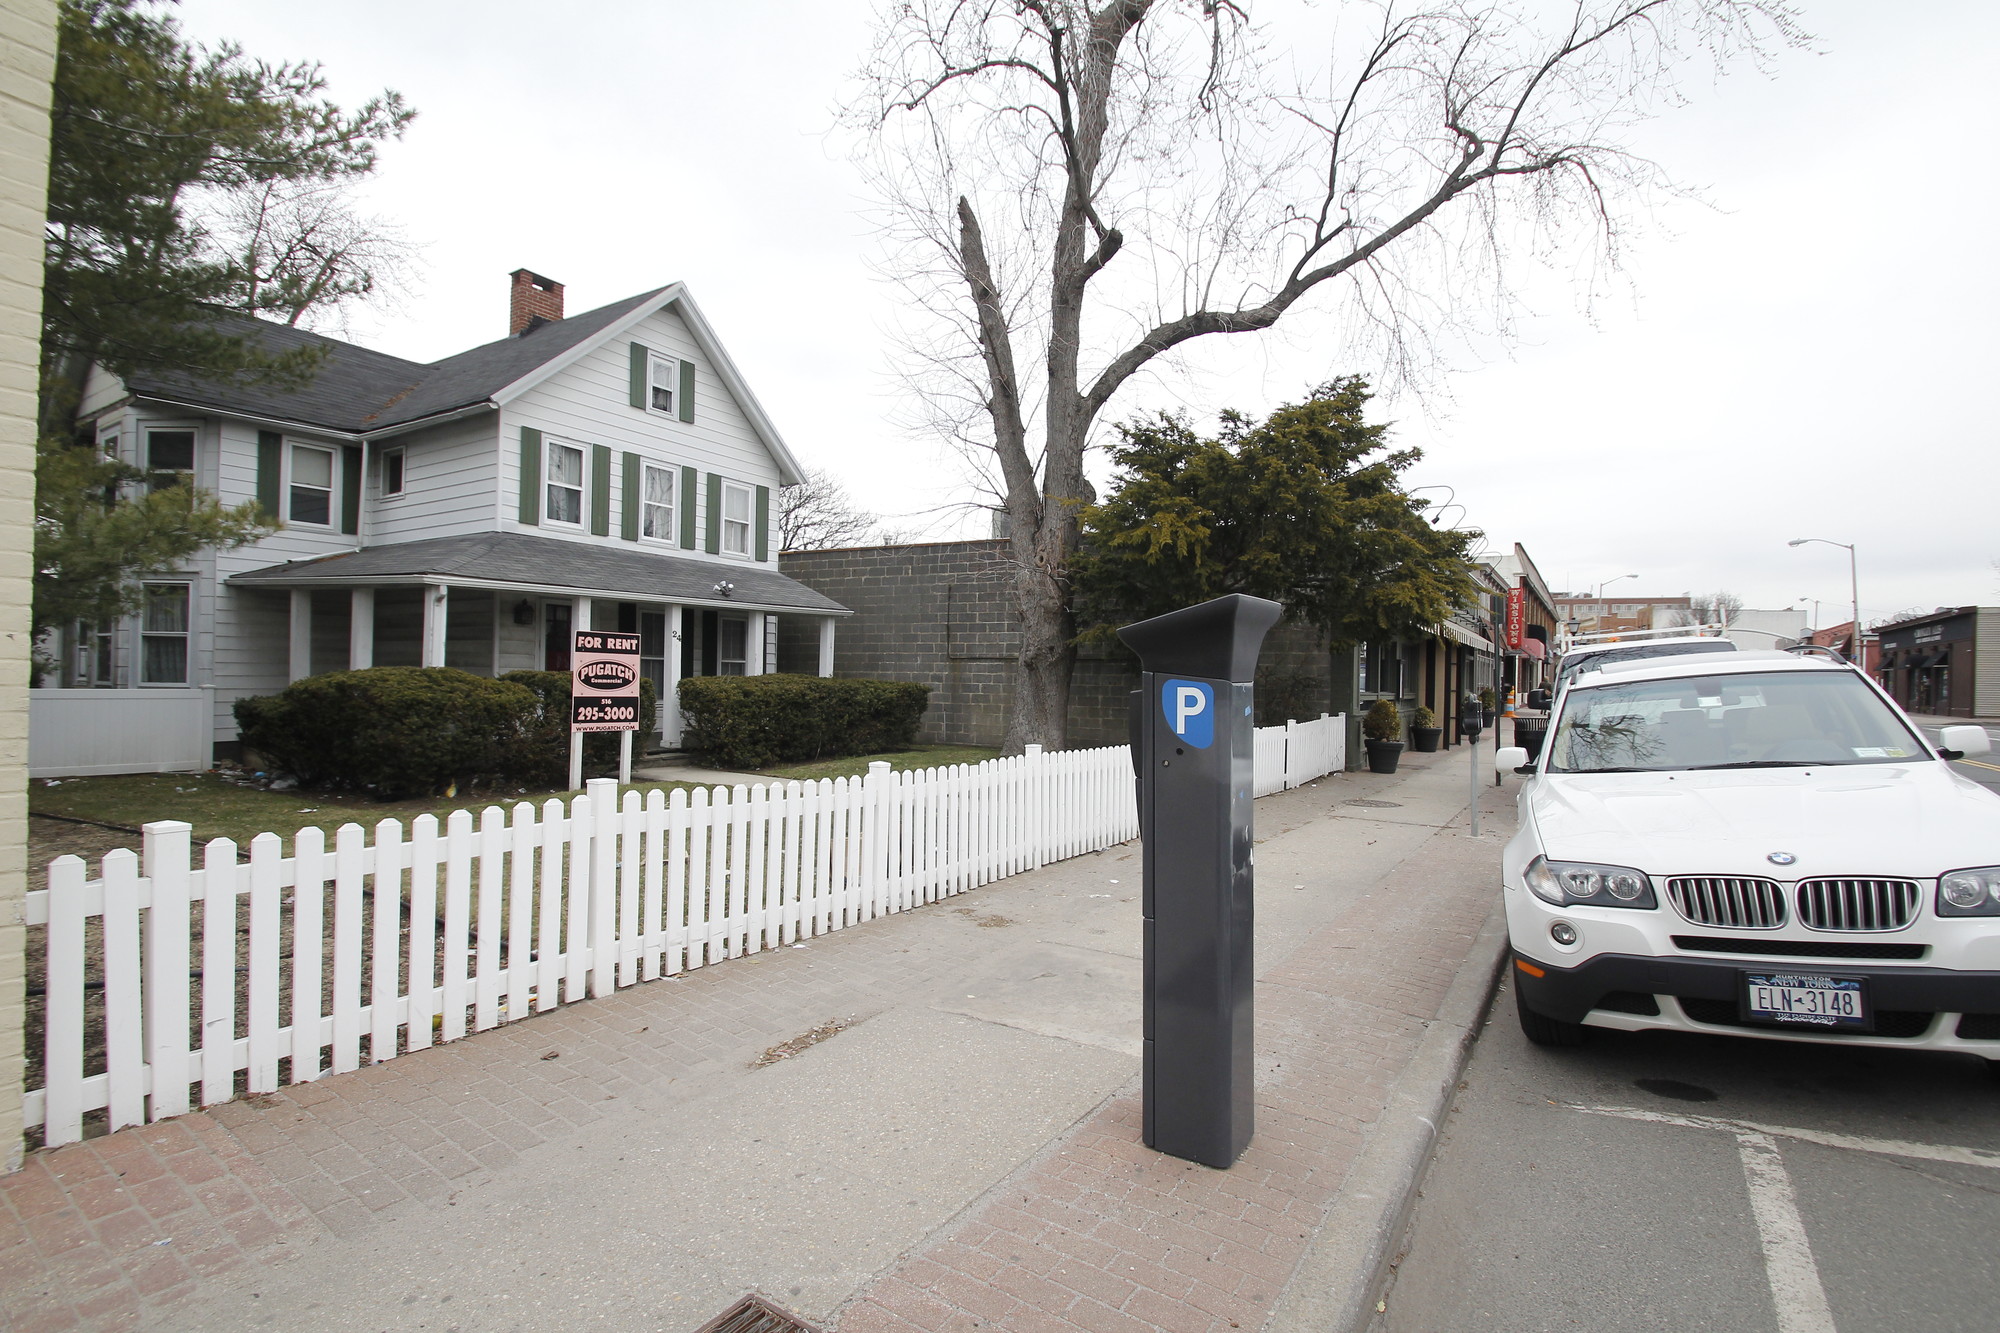 The house on Park Avenue received BZA approval to be turned into an oyster and small-plate restaurant, but wouldn’t provide any additional space for parking.